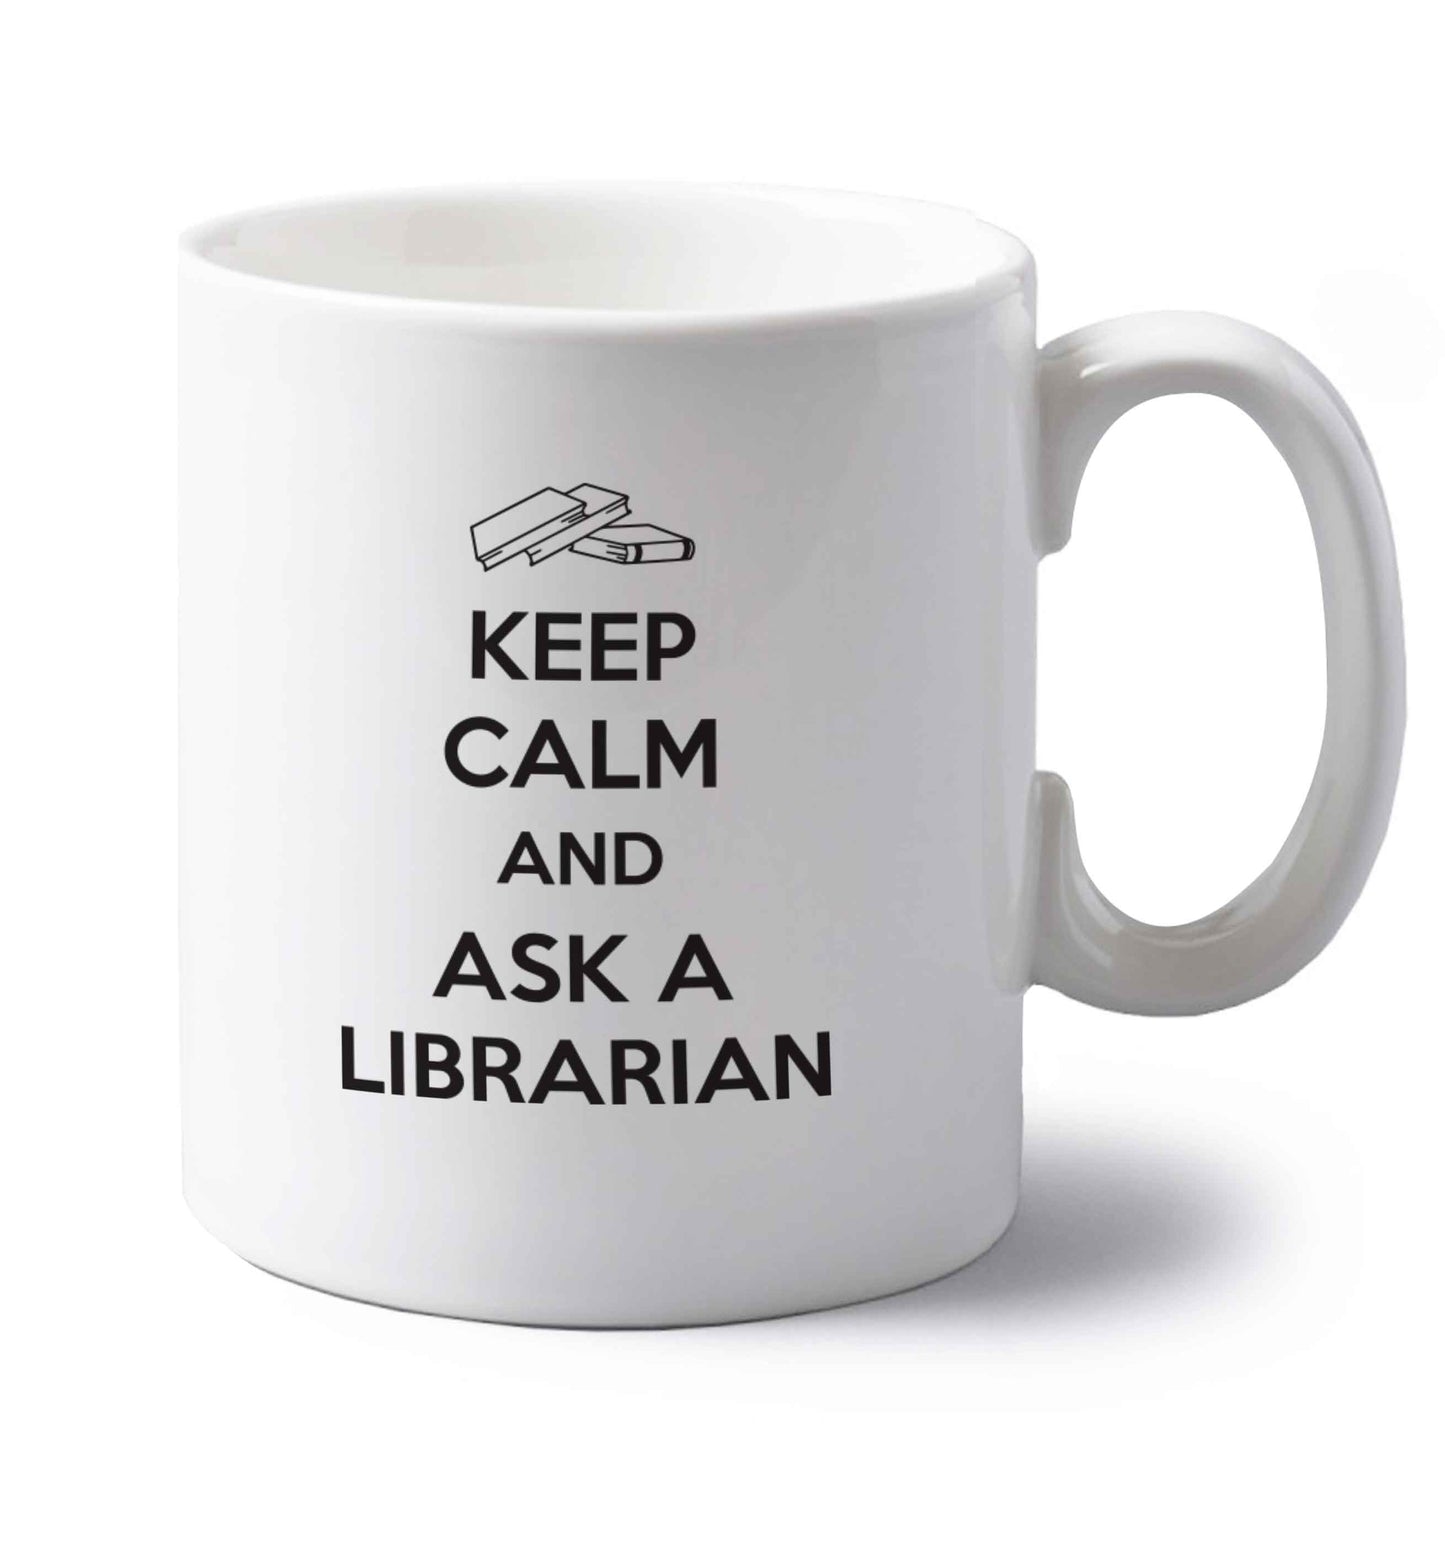 Keep calm and ask a librarian left handed white ceramic mug 